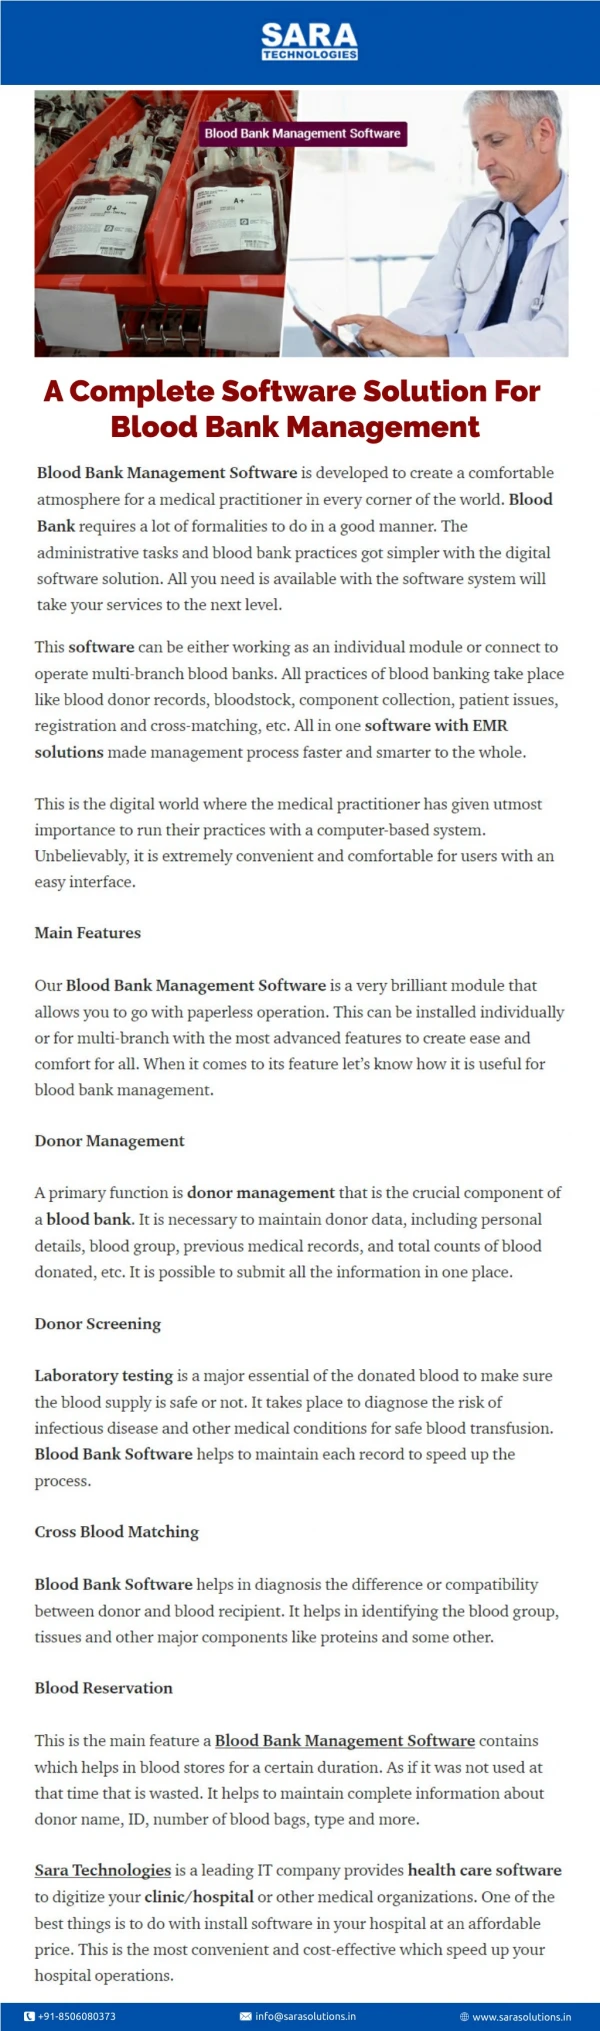 A Complete Software Solution For Blood Bank Management